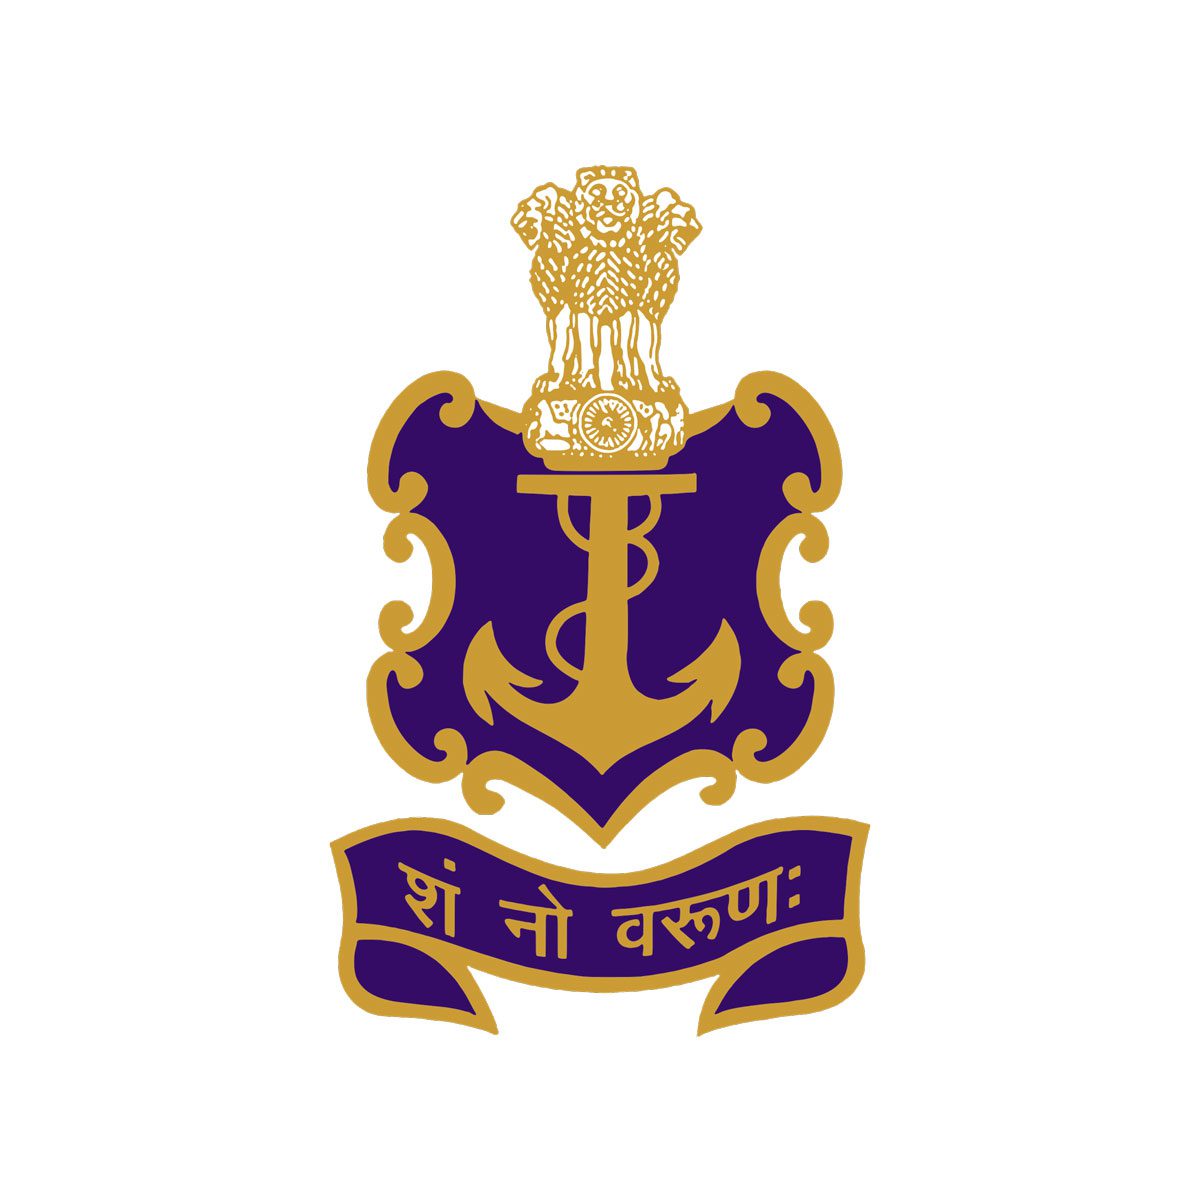 Indian Navy Marine Engine Fitter Apprentice Recruitment - Indian Armed Forces Job Vacancies